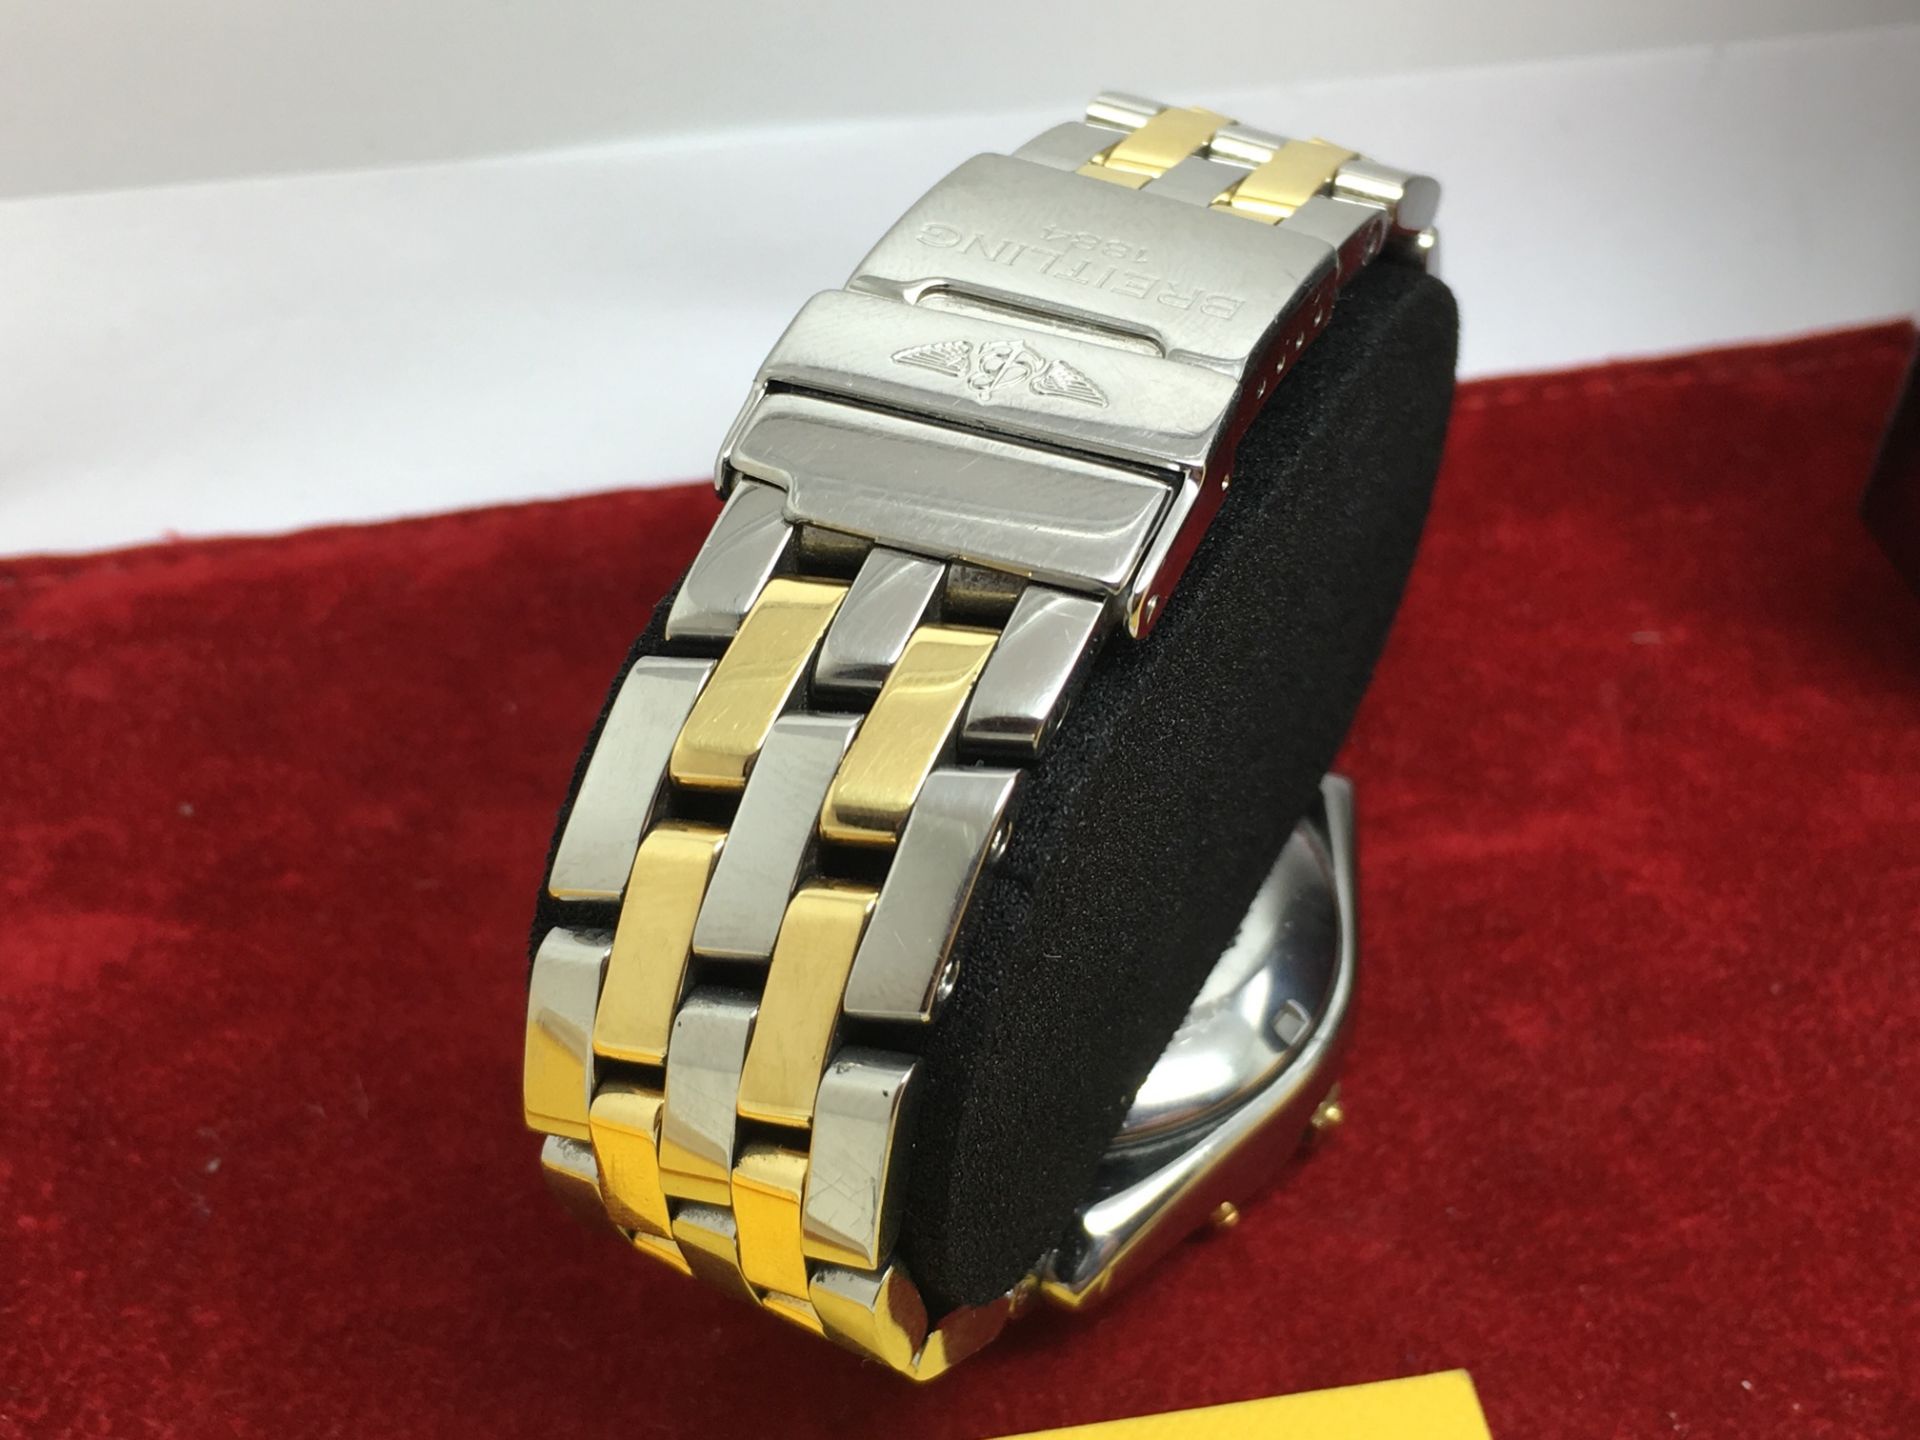 BREITLING CHRONOMAT EVOLUTION WATCH IN STAINLESS AND GOLD - WITH BOX & PAPERS - Image 3 of 7